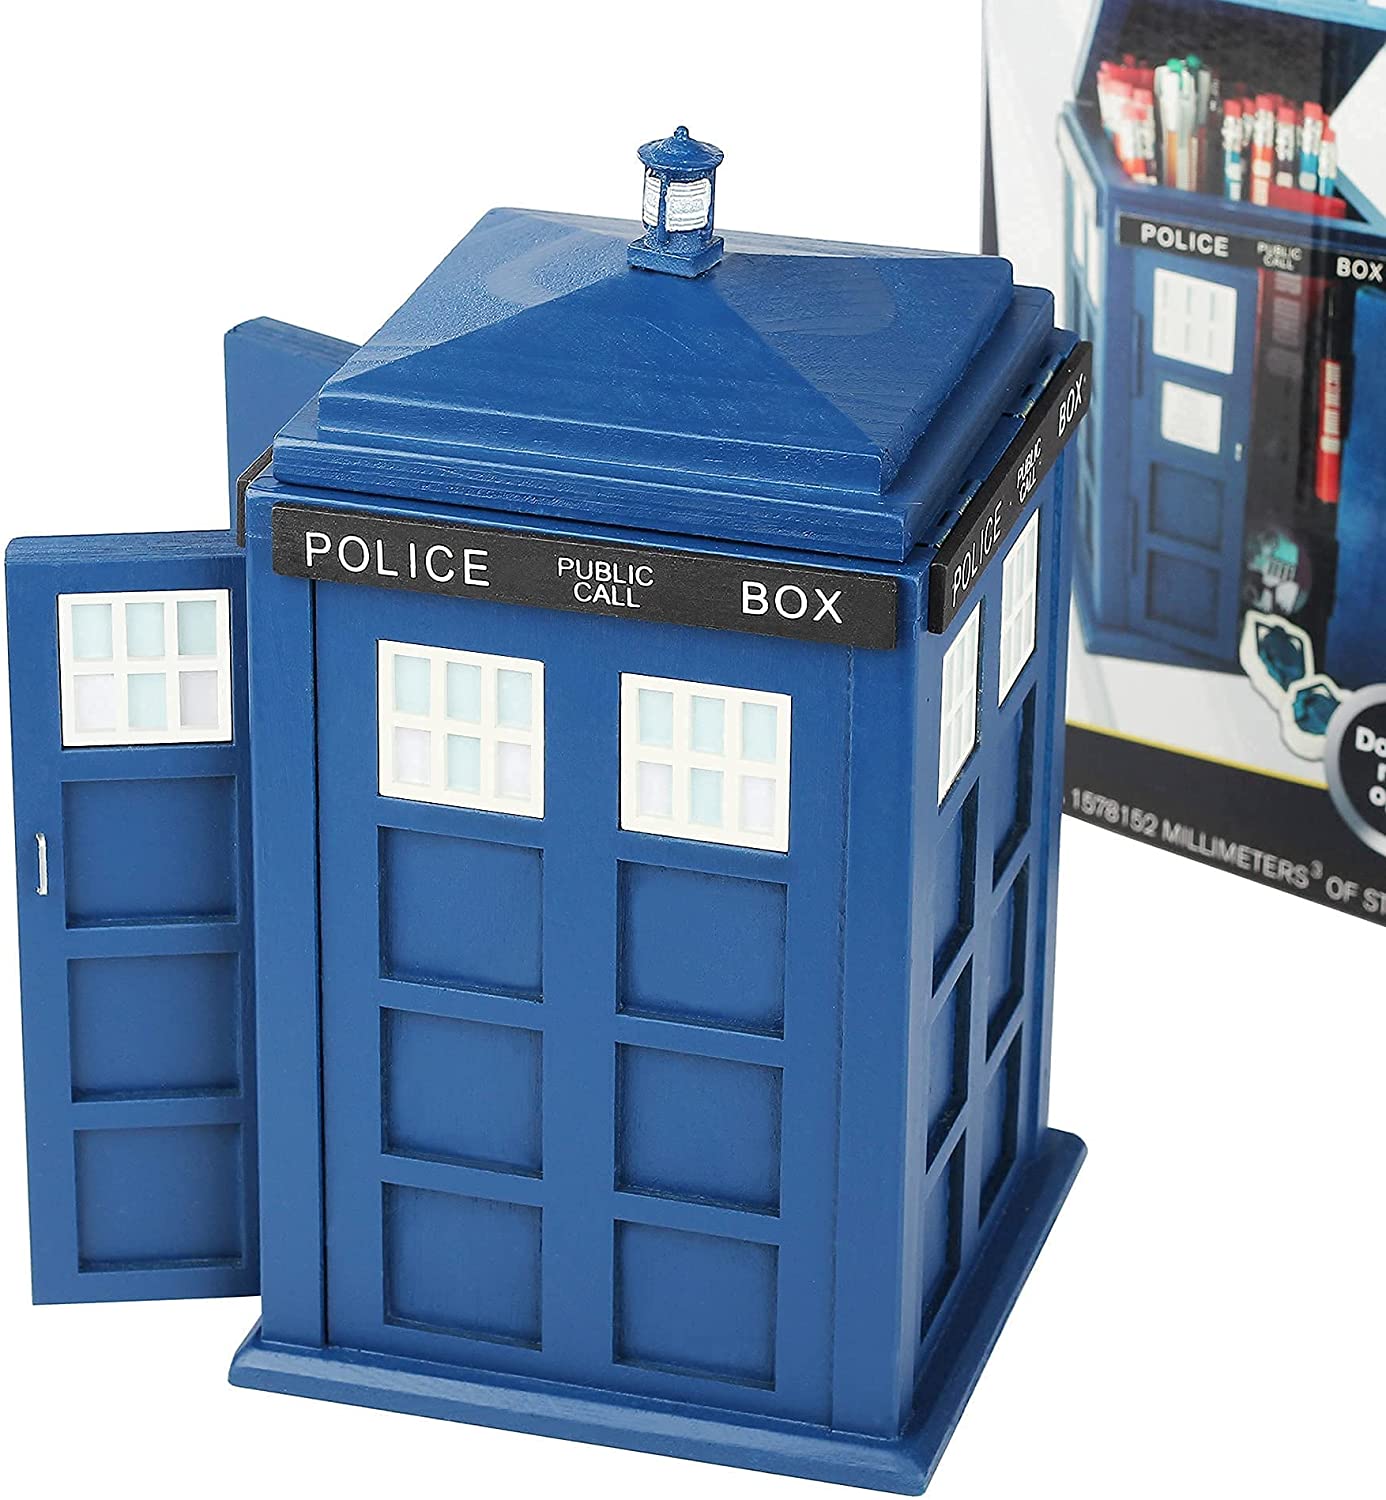 A storage box shaped like the Tardis from Doctor Who. The doors of the Tardis are open.